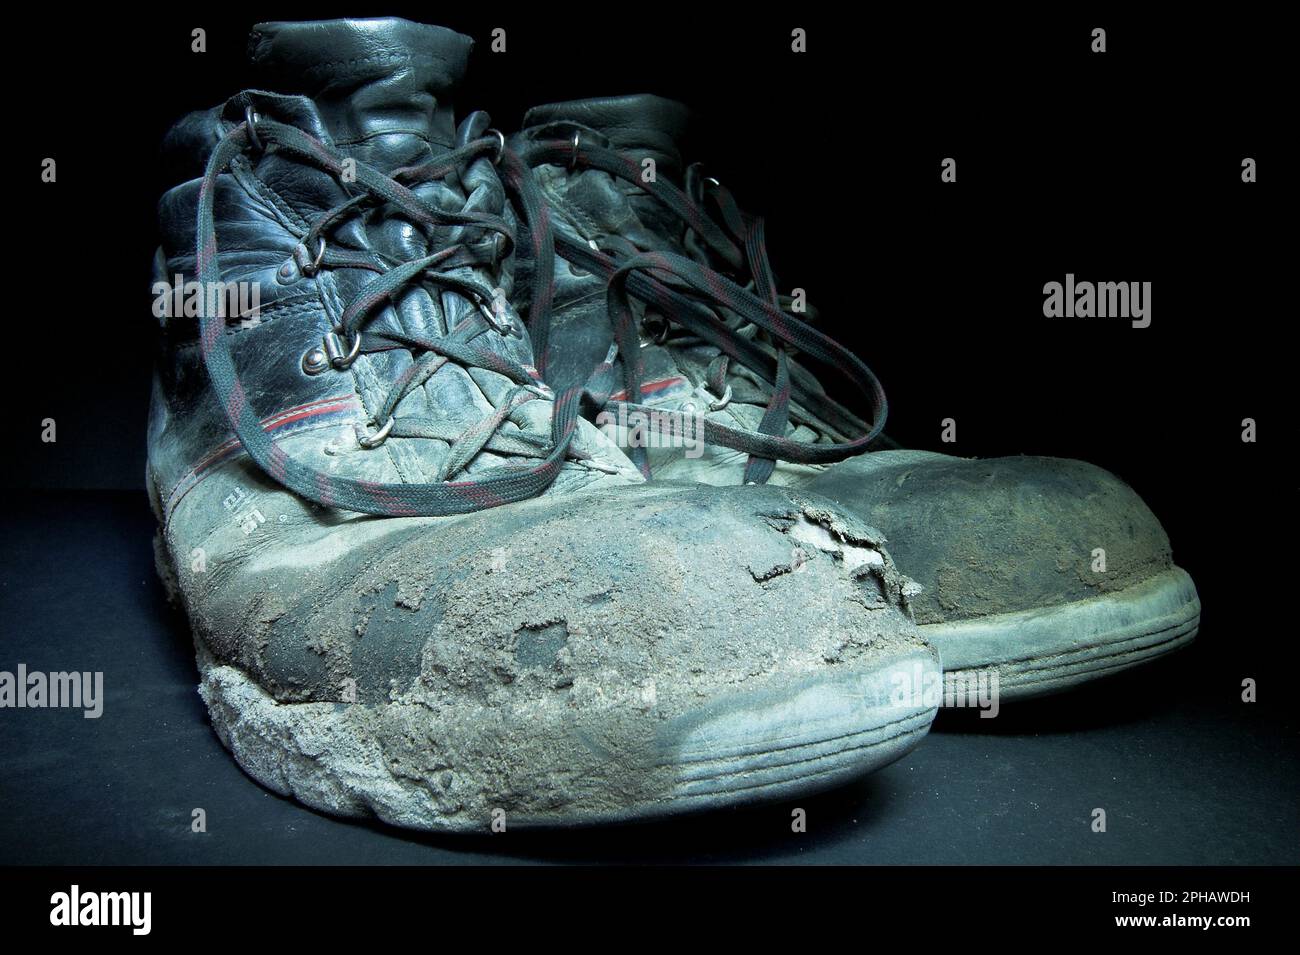 Alte Arbeitsschuhe, Old work shoes Stock Photo